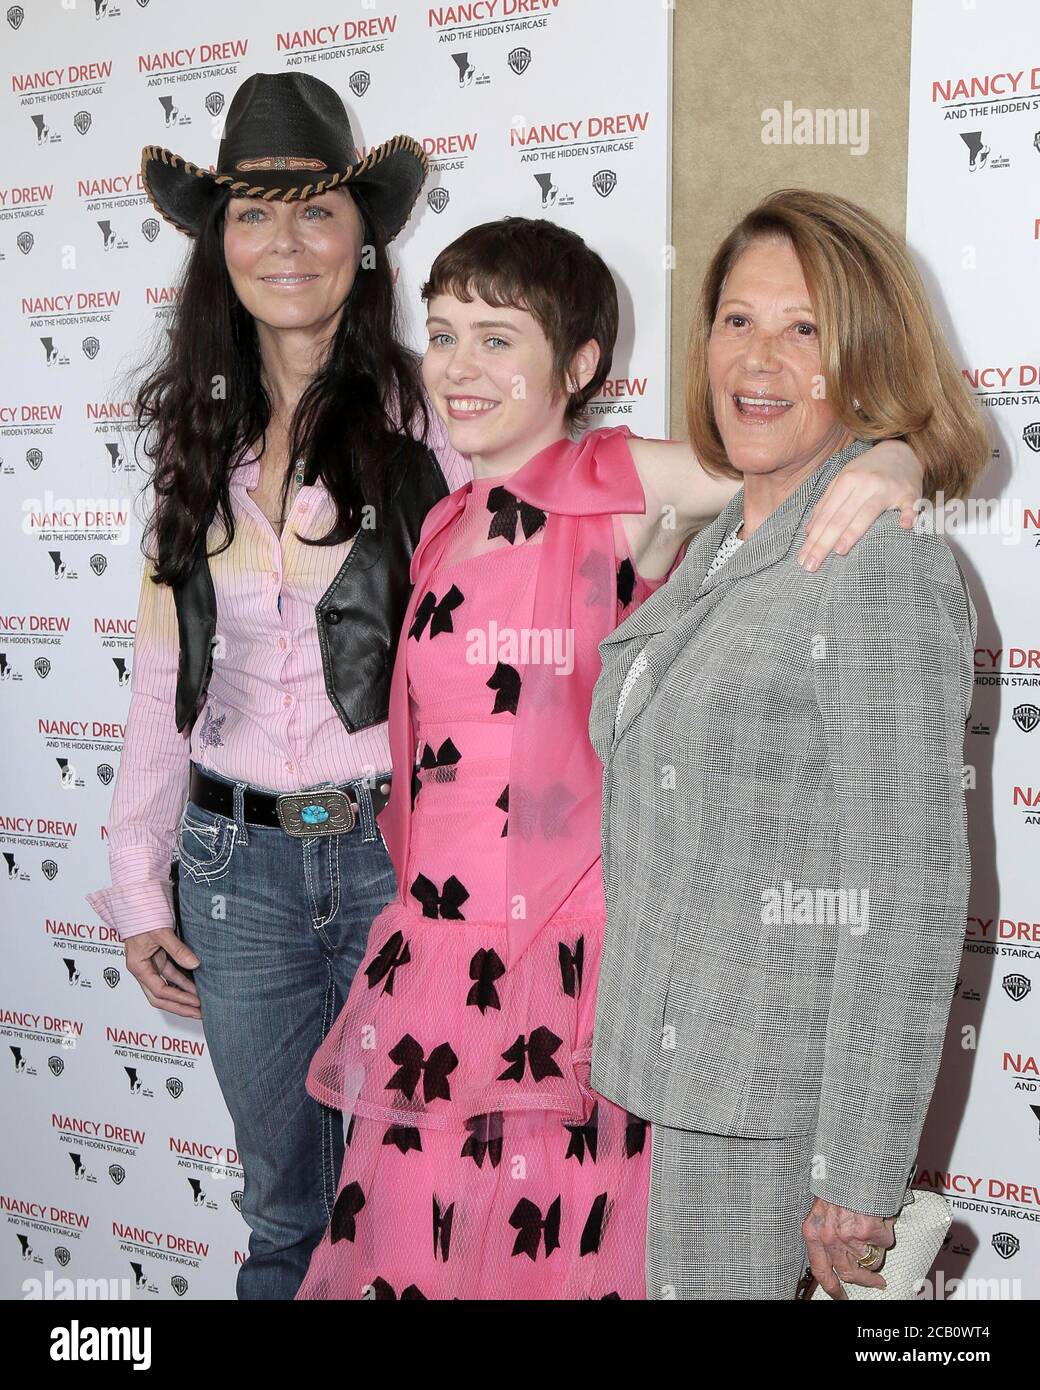 LOS ANGELES - MAR 10:  Katt Shea, Sophia Lillis, Linda Lavin at the 'Nancy Drew And The Hidden Staircase' World Premiere at the AMC Century City 15 on March 10, 2019 in Century City, CA Stock Photo